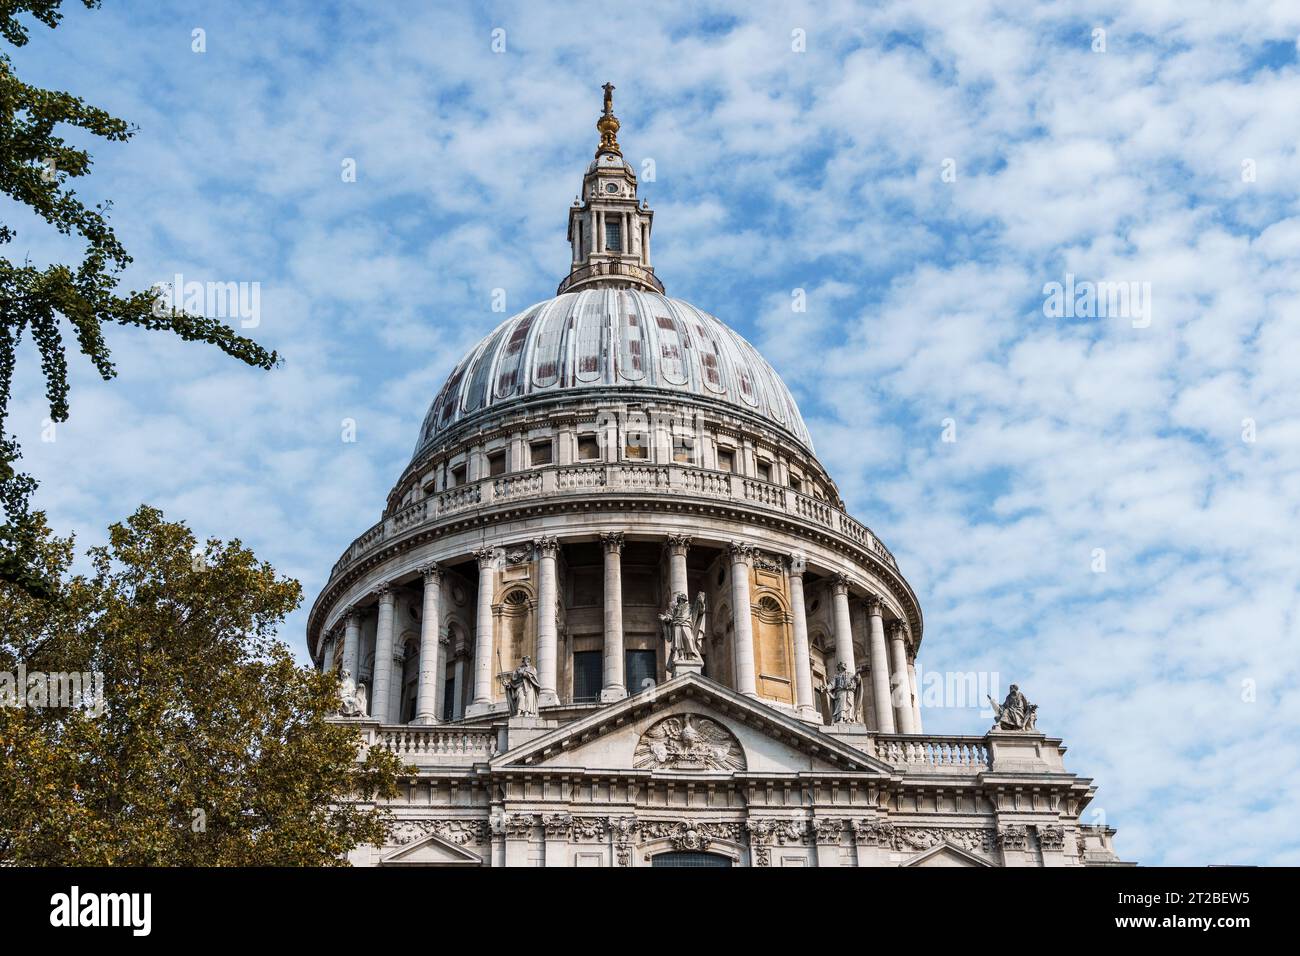 Low angle view of the Dome of St Paul Cathedral in London Stock Photo